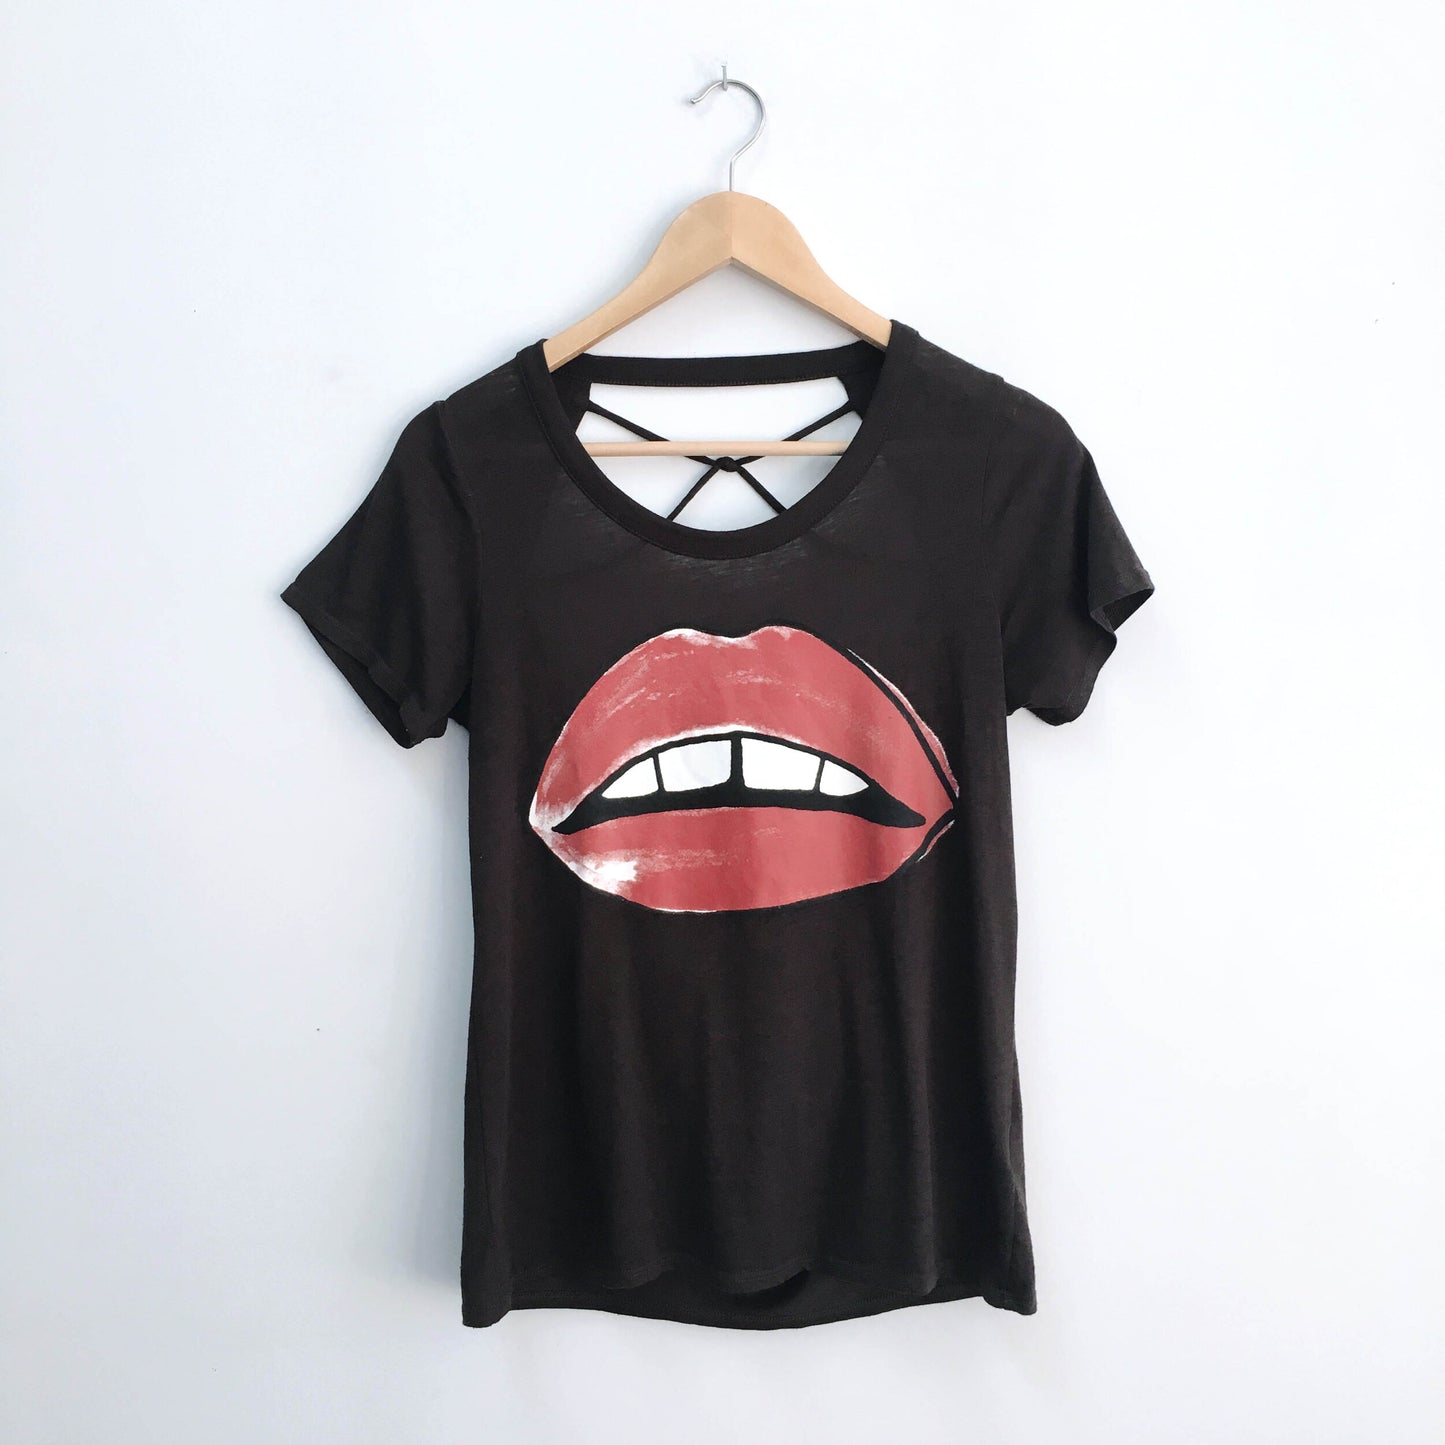 CHASER big lips open back tee - size xs